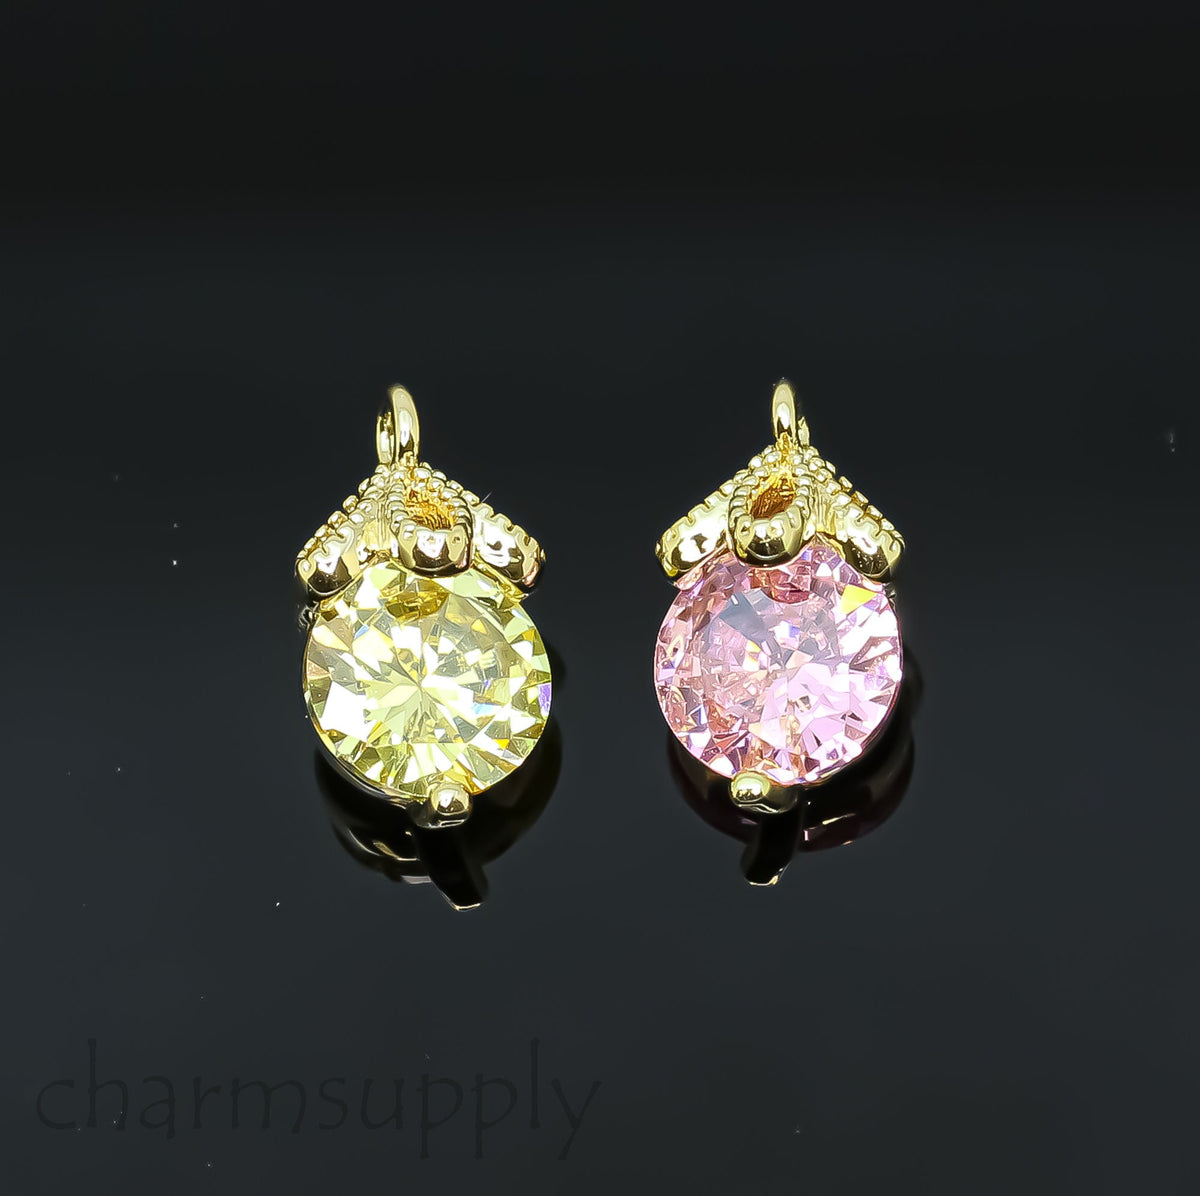 Little Spring/Summer colors CZ Embellished Pendant, Yellow Sapphire or Pink Topaz, 6x10.5mm, Little Sparkle Love, 1 pc or 10 pcs, WHOLESALE